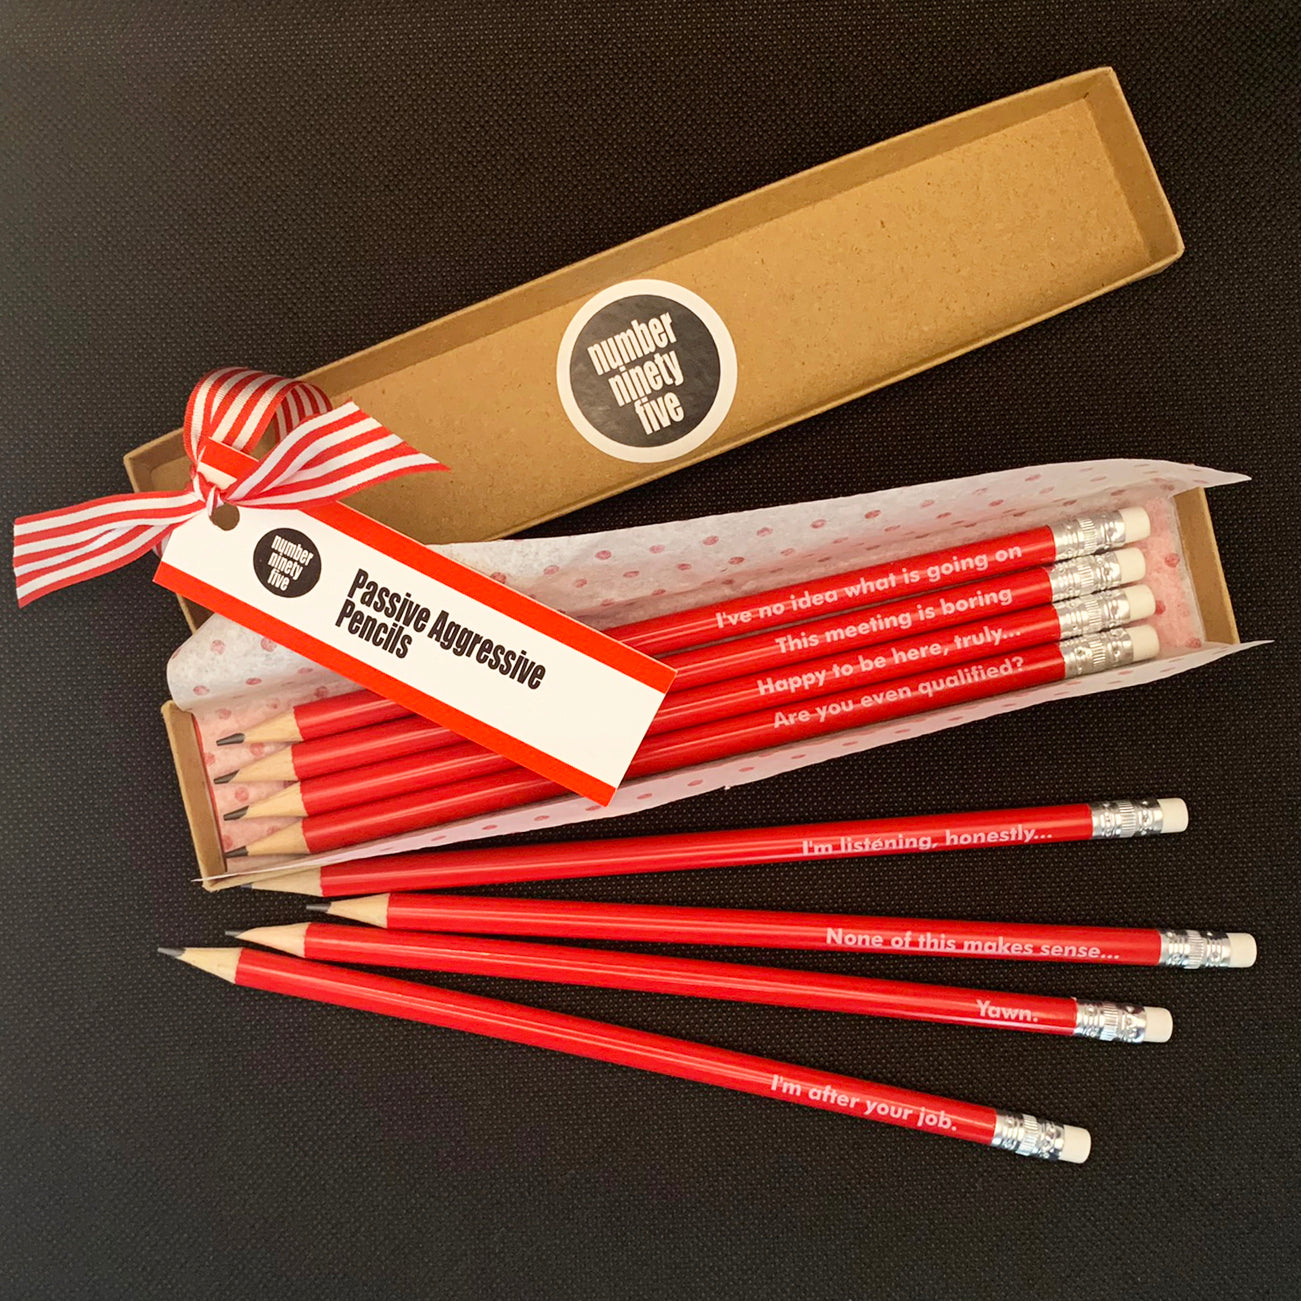 Number Ninety Five, Passive Aggressive pencils, 8 sharpened red pencils with white rubber tips, gift wrapped in a kraft box, with phases such as, I have no idea what is going on, This Meeting is Boring, Are you even qualified? and I'm after your job written on them in white text.